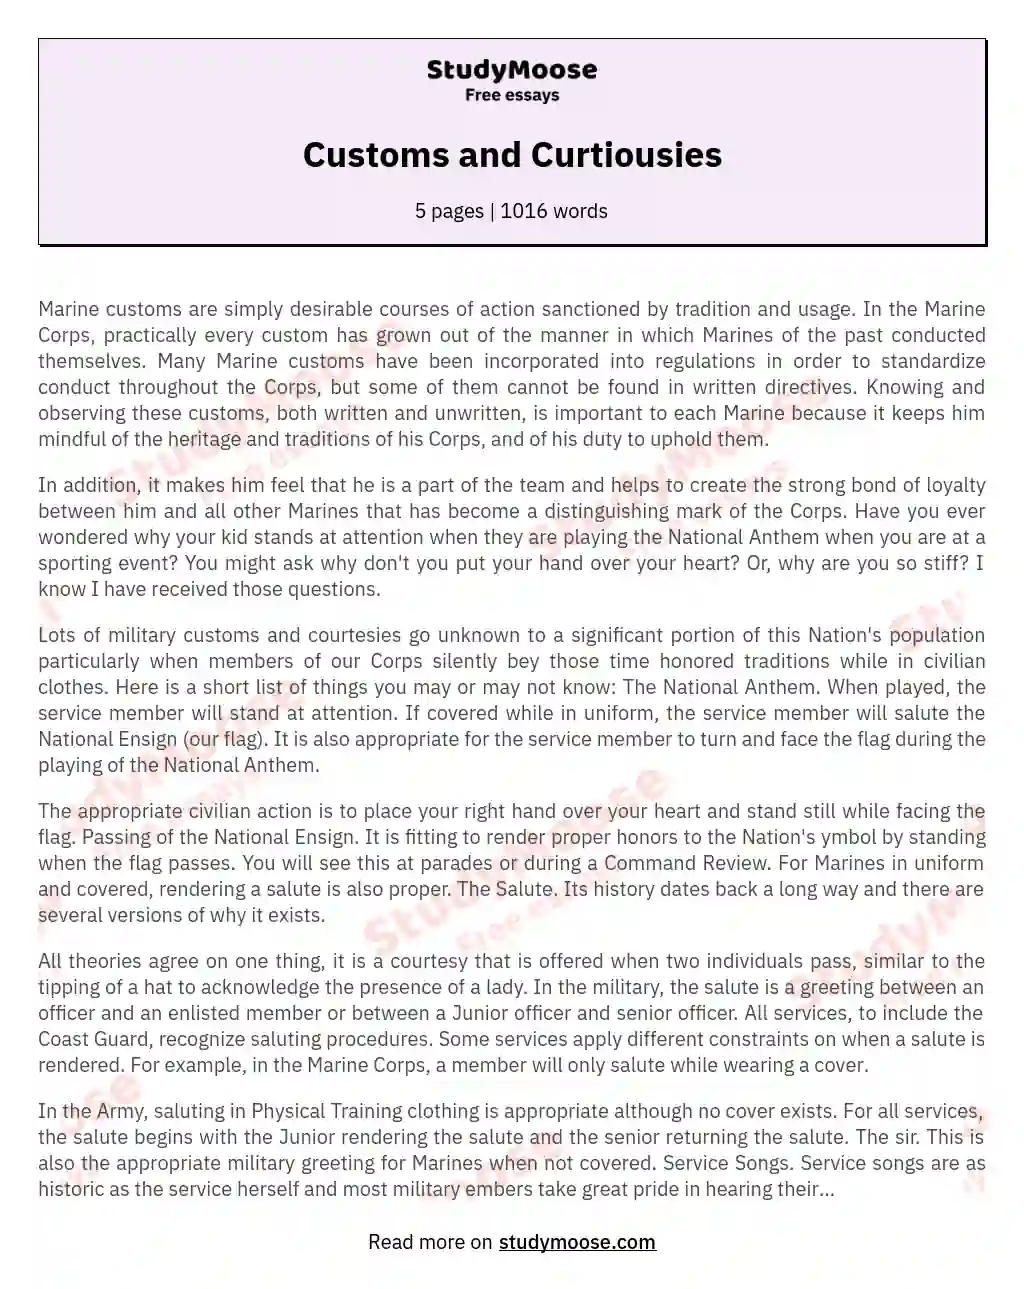 Customs and Curtiousies essay